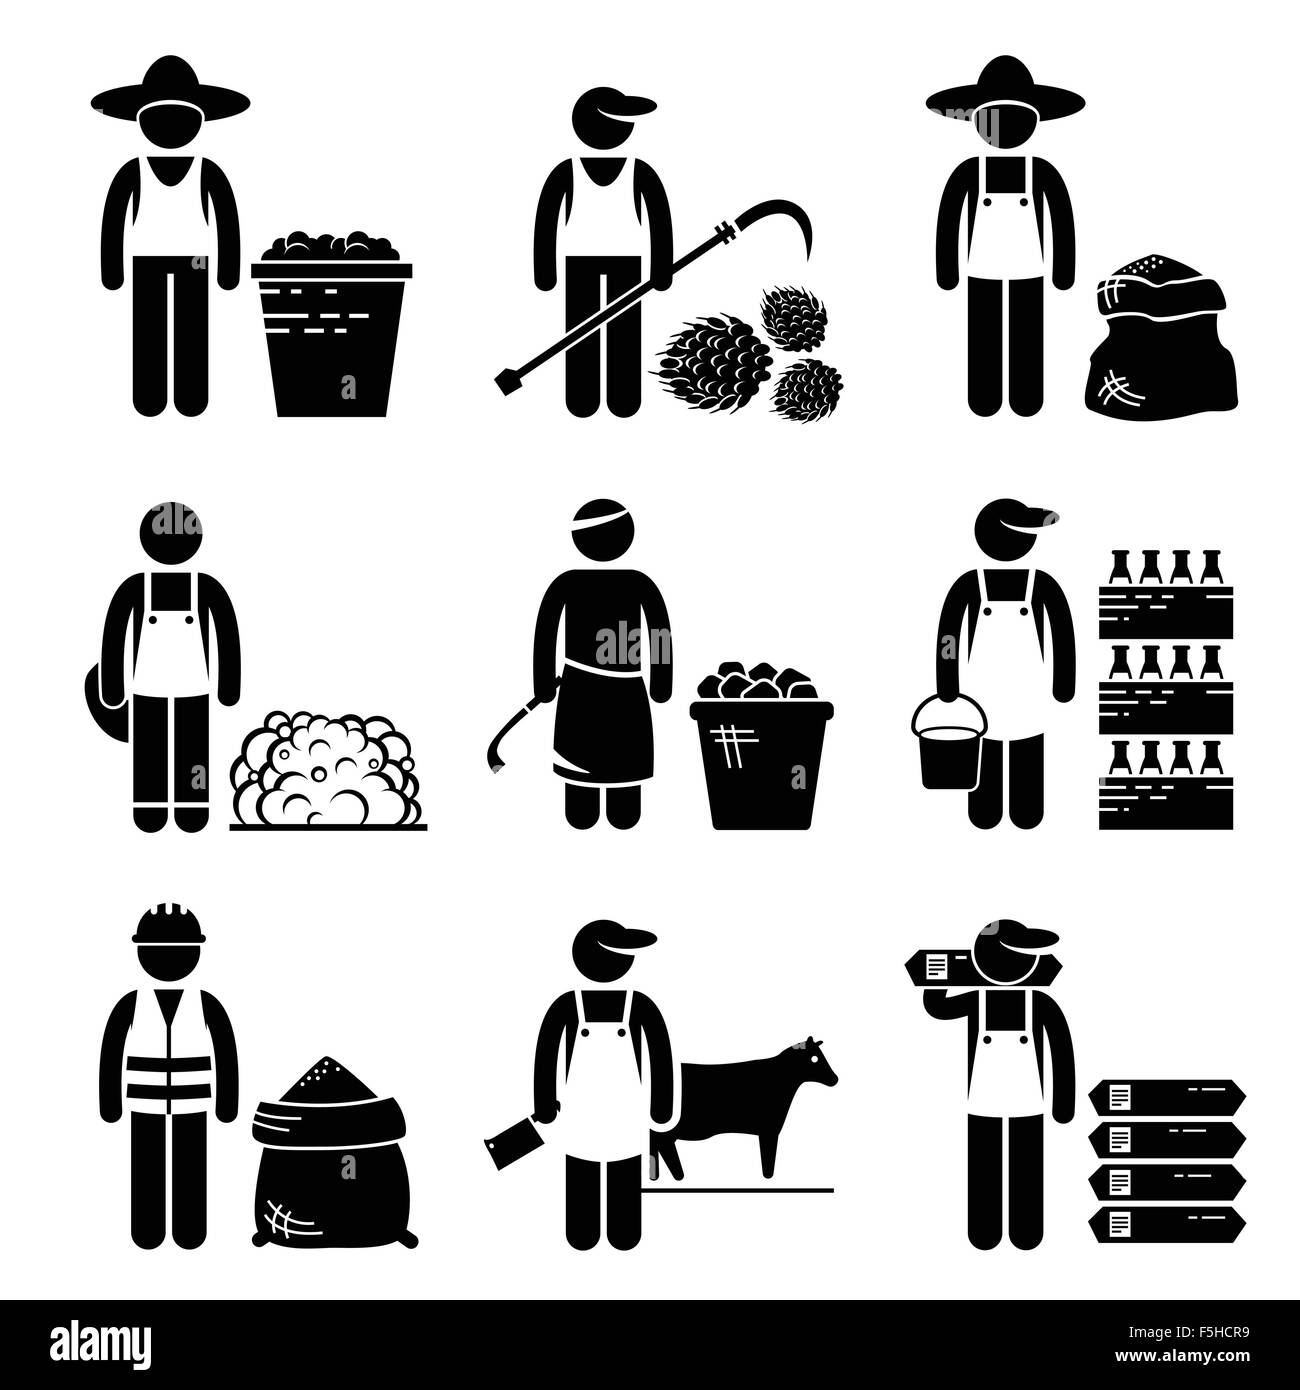 Commodities Food Agricultural Grains Meat Stick Figure Pictogram Icons Stock Vector